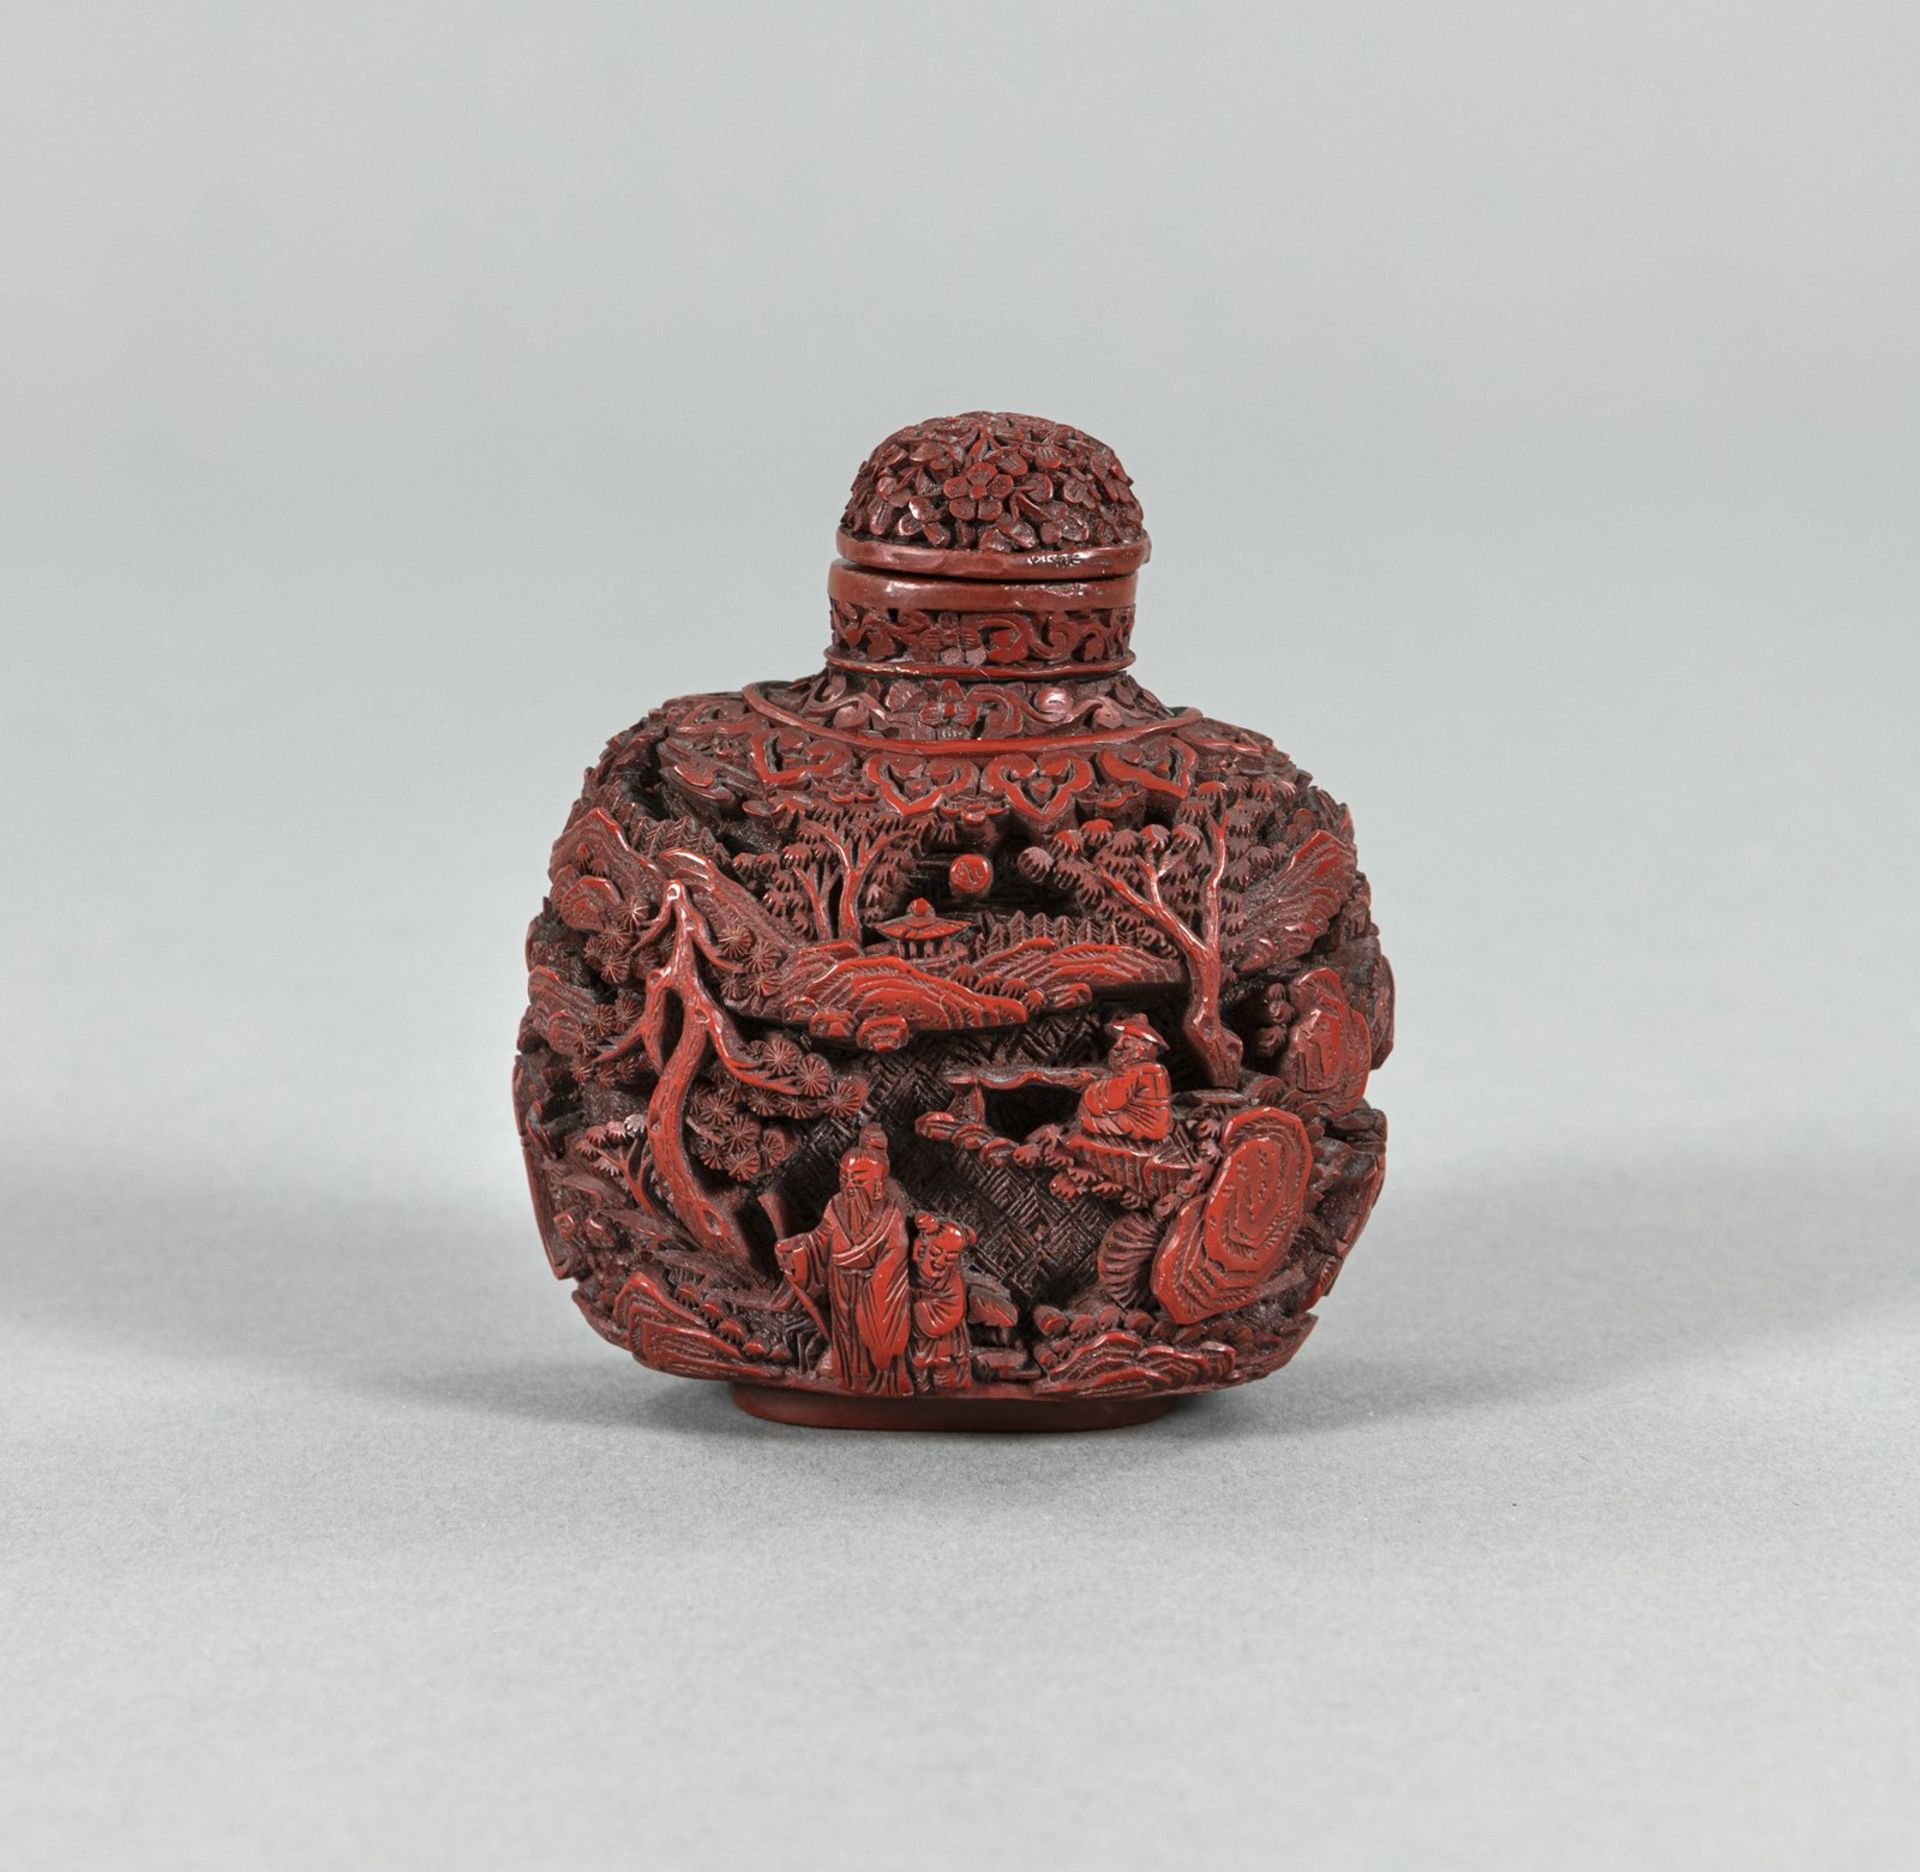 A LACQUER SNUFFBOTTLE